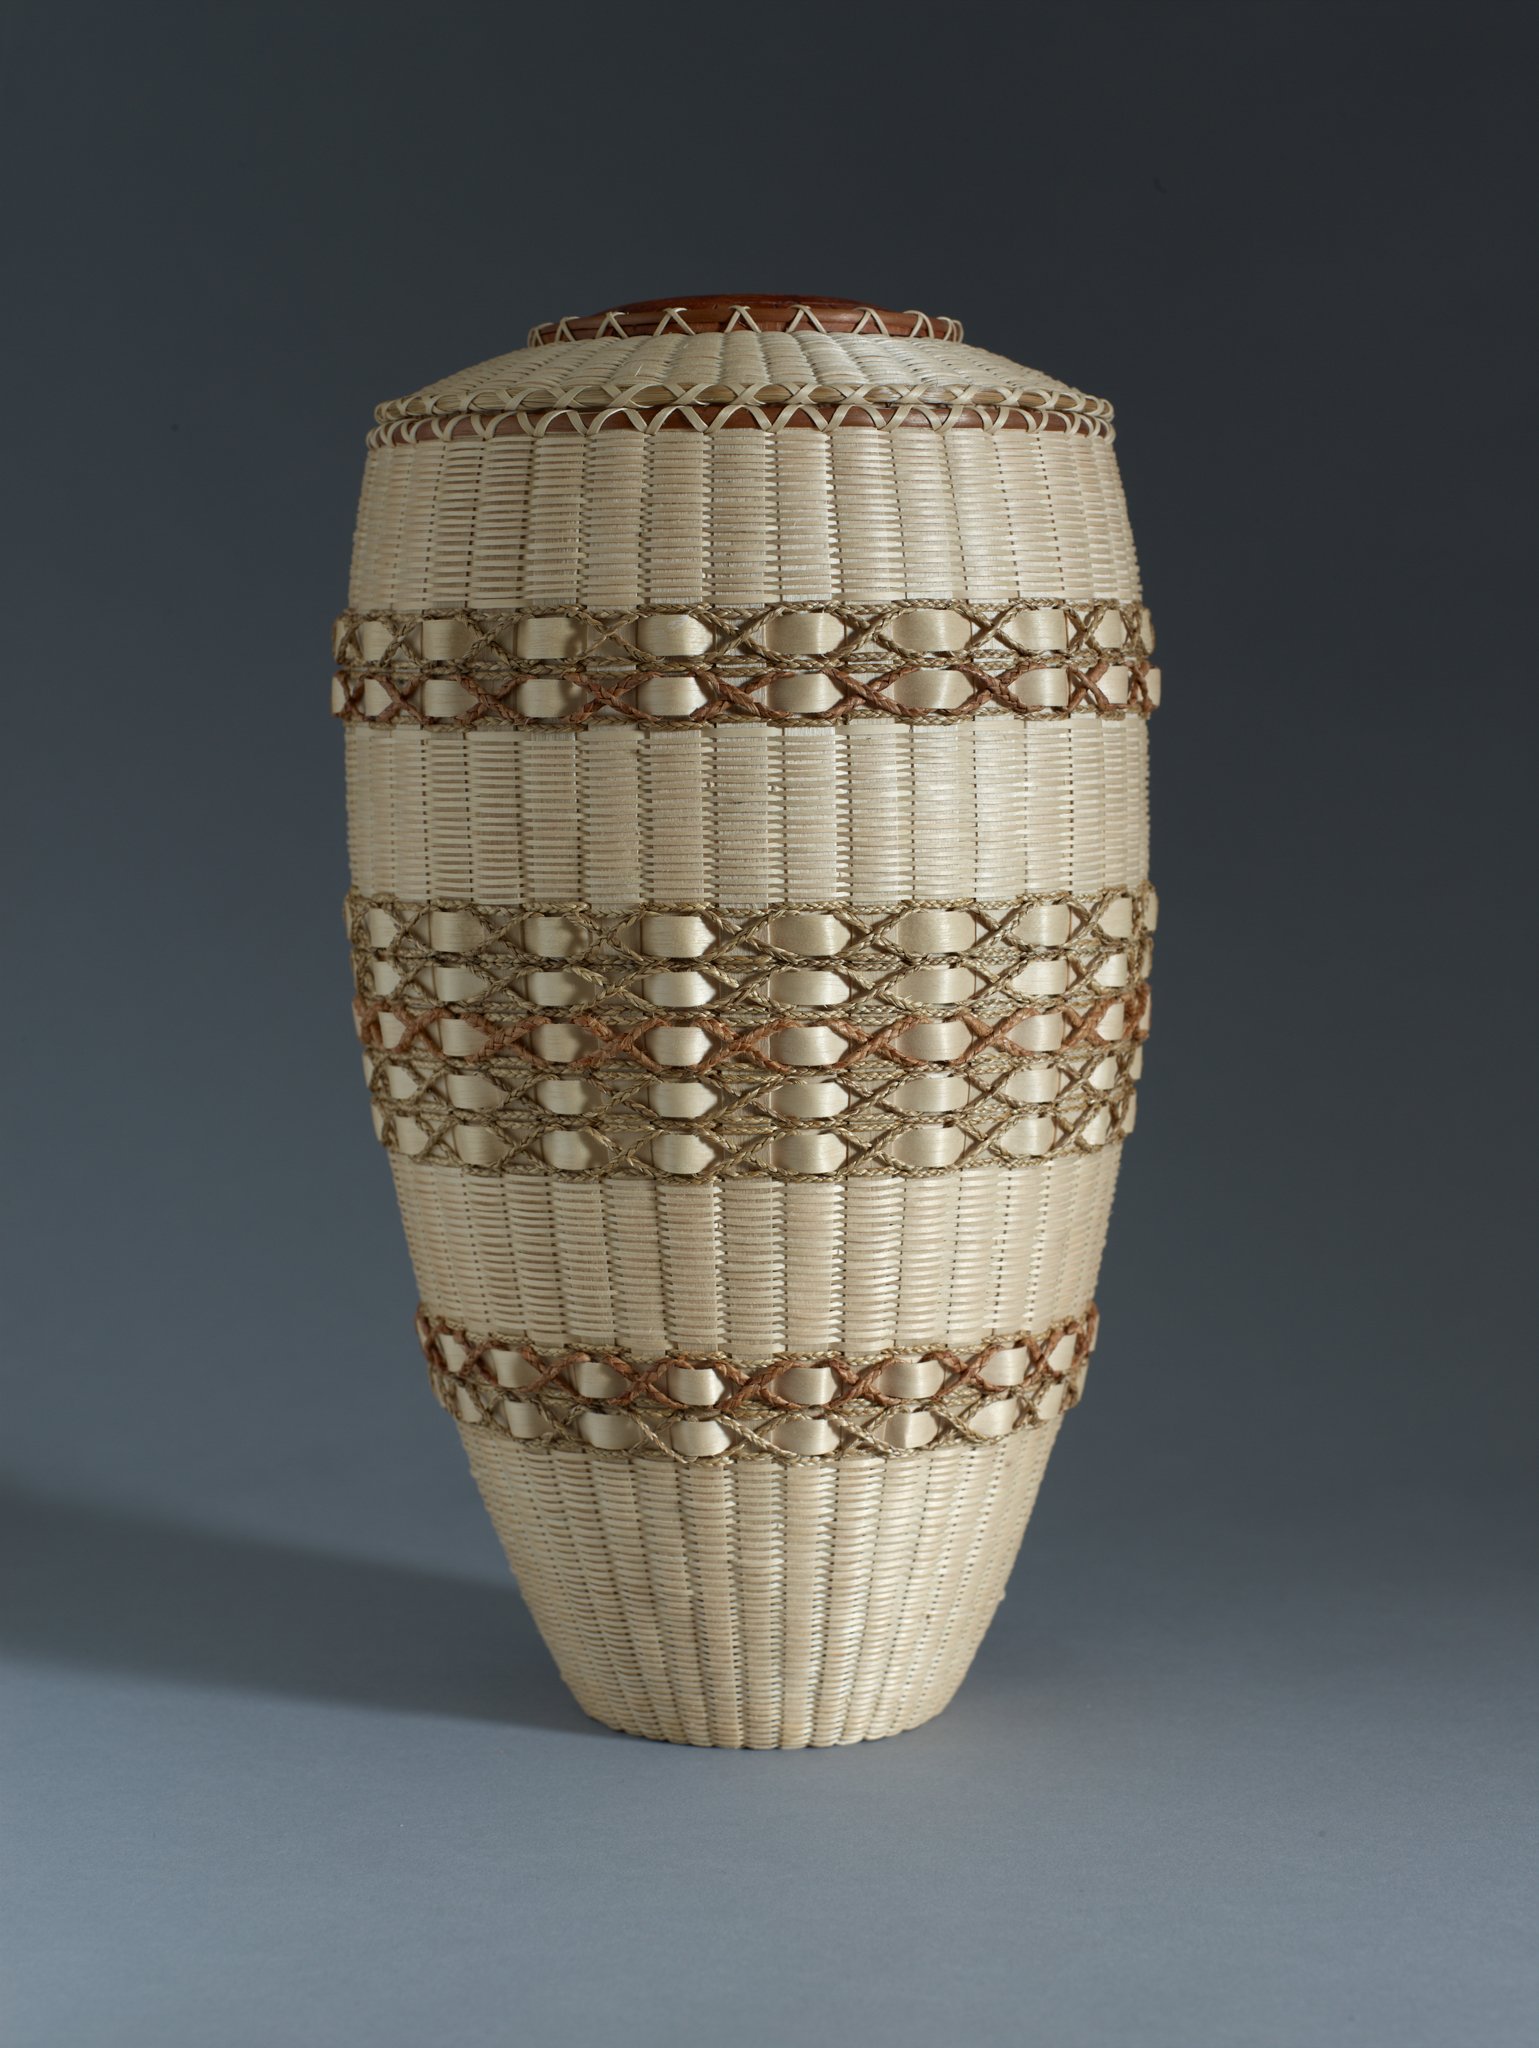  Jeremy Frey (Passamaquoddy, born 1978),  Covered Vase , 2016, ash, cedar bark, cherry wood, sweetgrass, and spruce root, 14 3/4 x 7 x 7 inches. Portland Museum of Art, Maine. Gift of Barbara M. Goodbody, 2021.19.6a,b. © Jeremy Frey. Image courtesy L